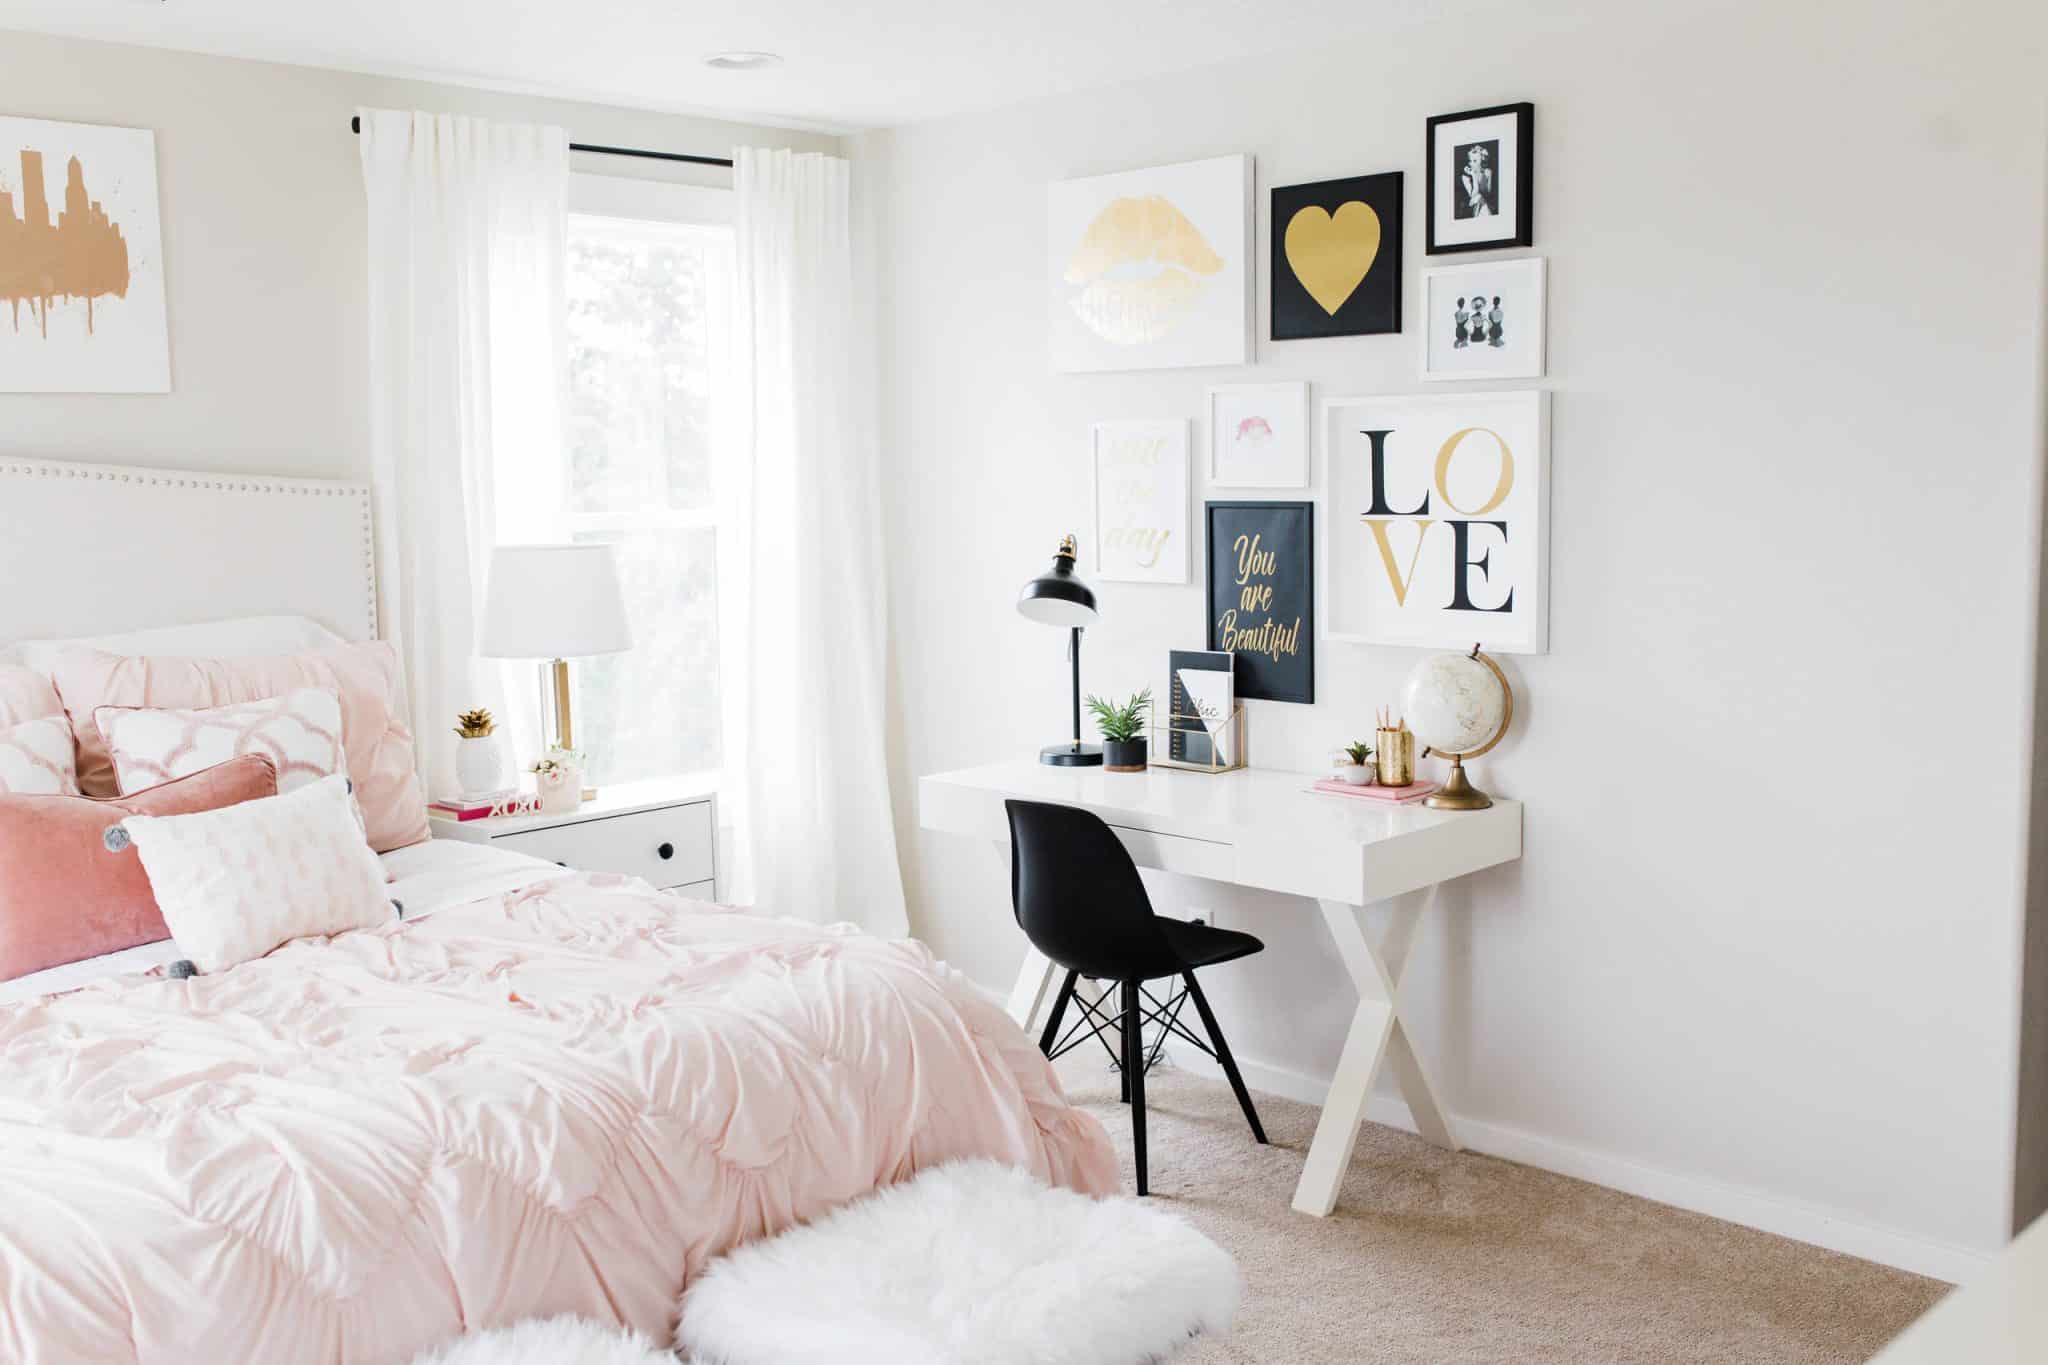 How to Decorate a Teenage Girl’s Bedroom?